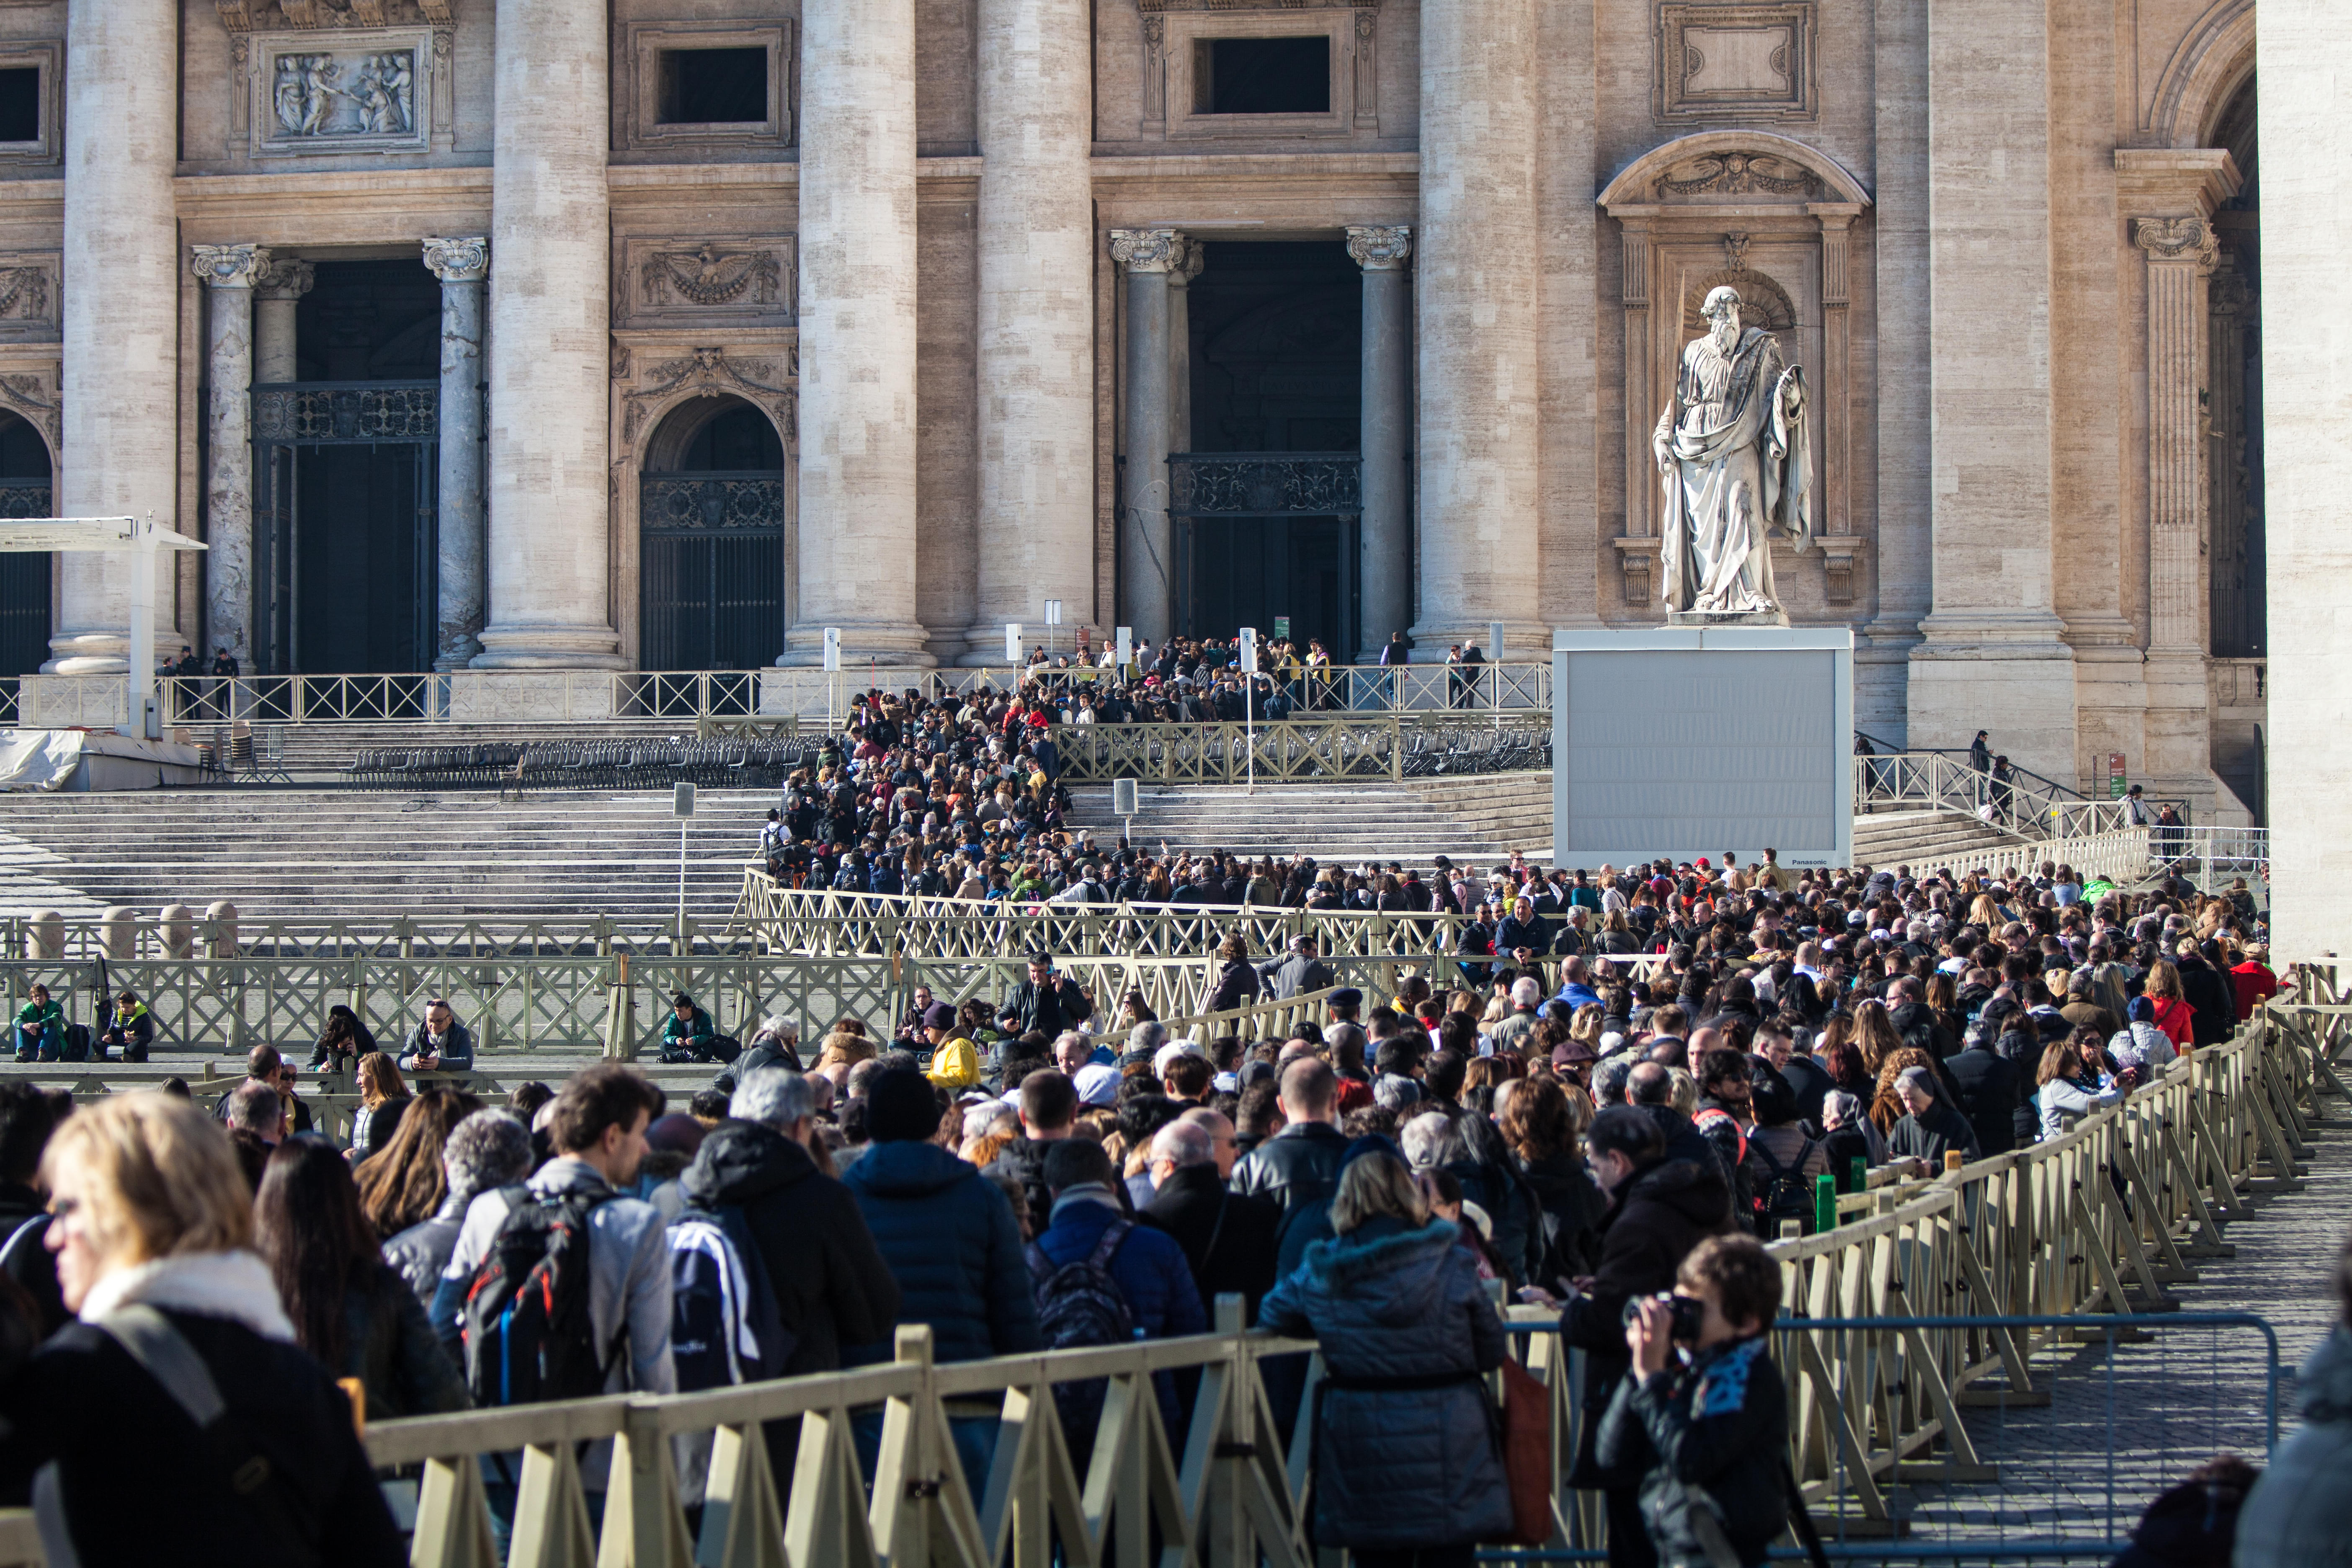 St. Peter's Basilica Events